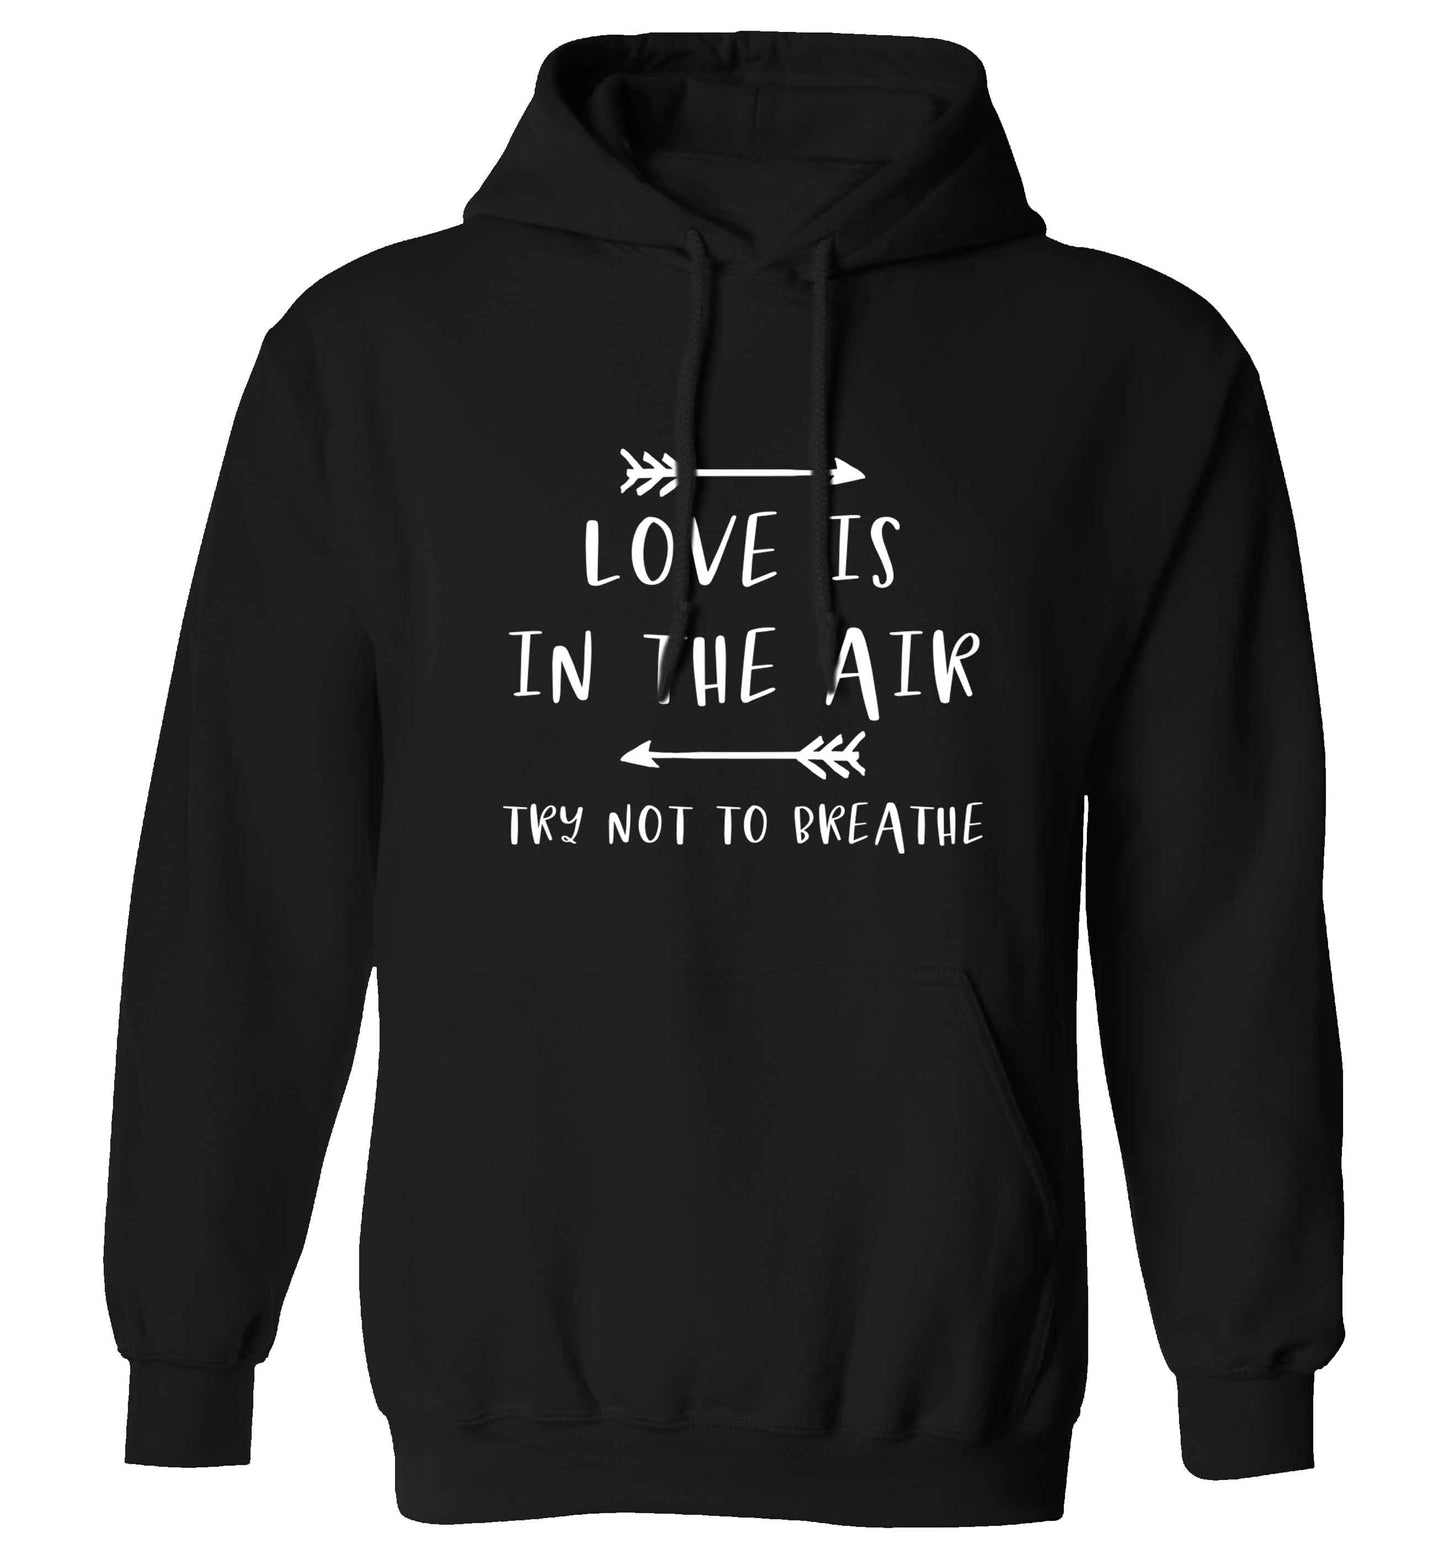 Love is in the air try not to breathe adults unisex black hoodie 2XL